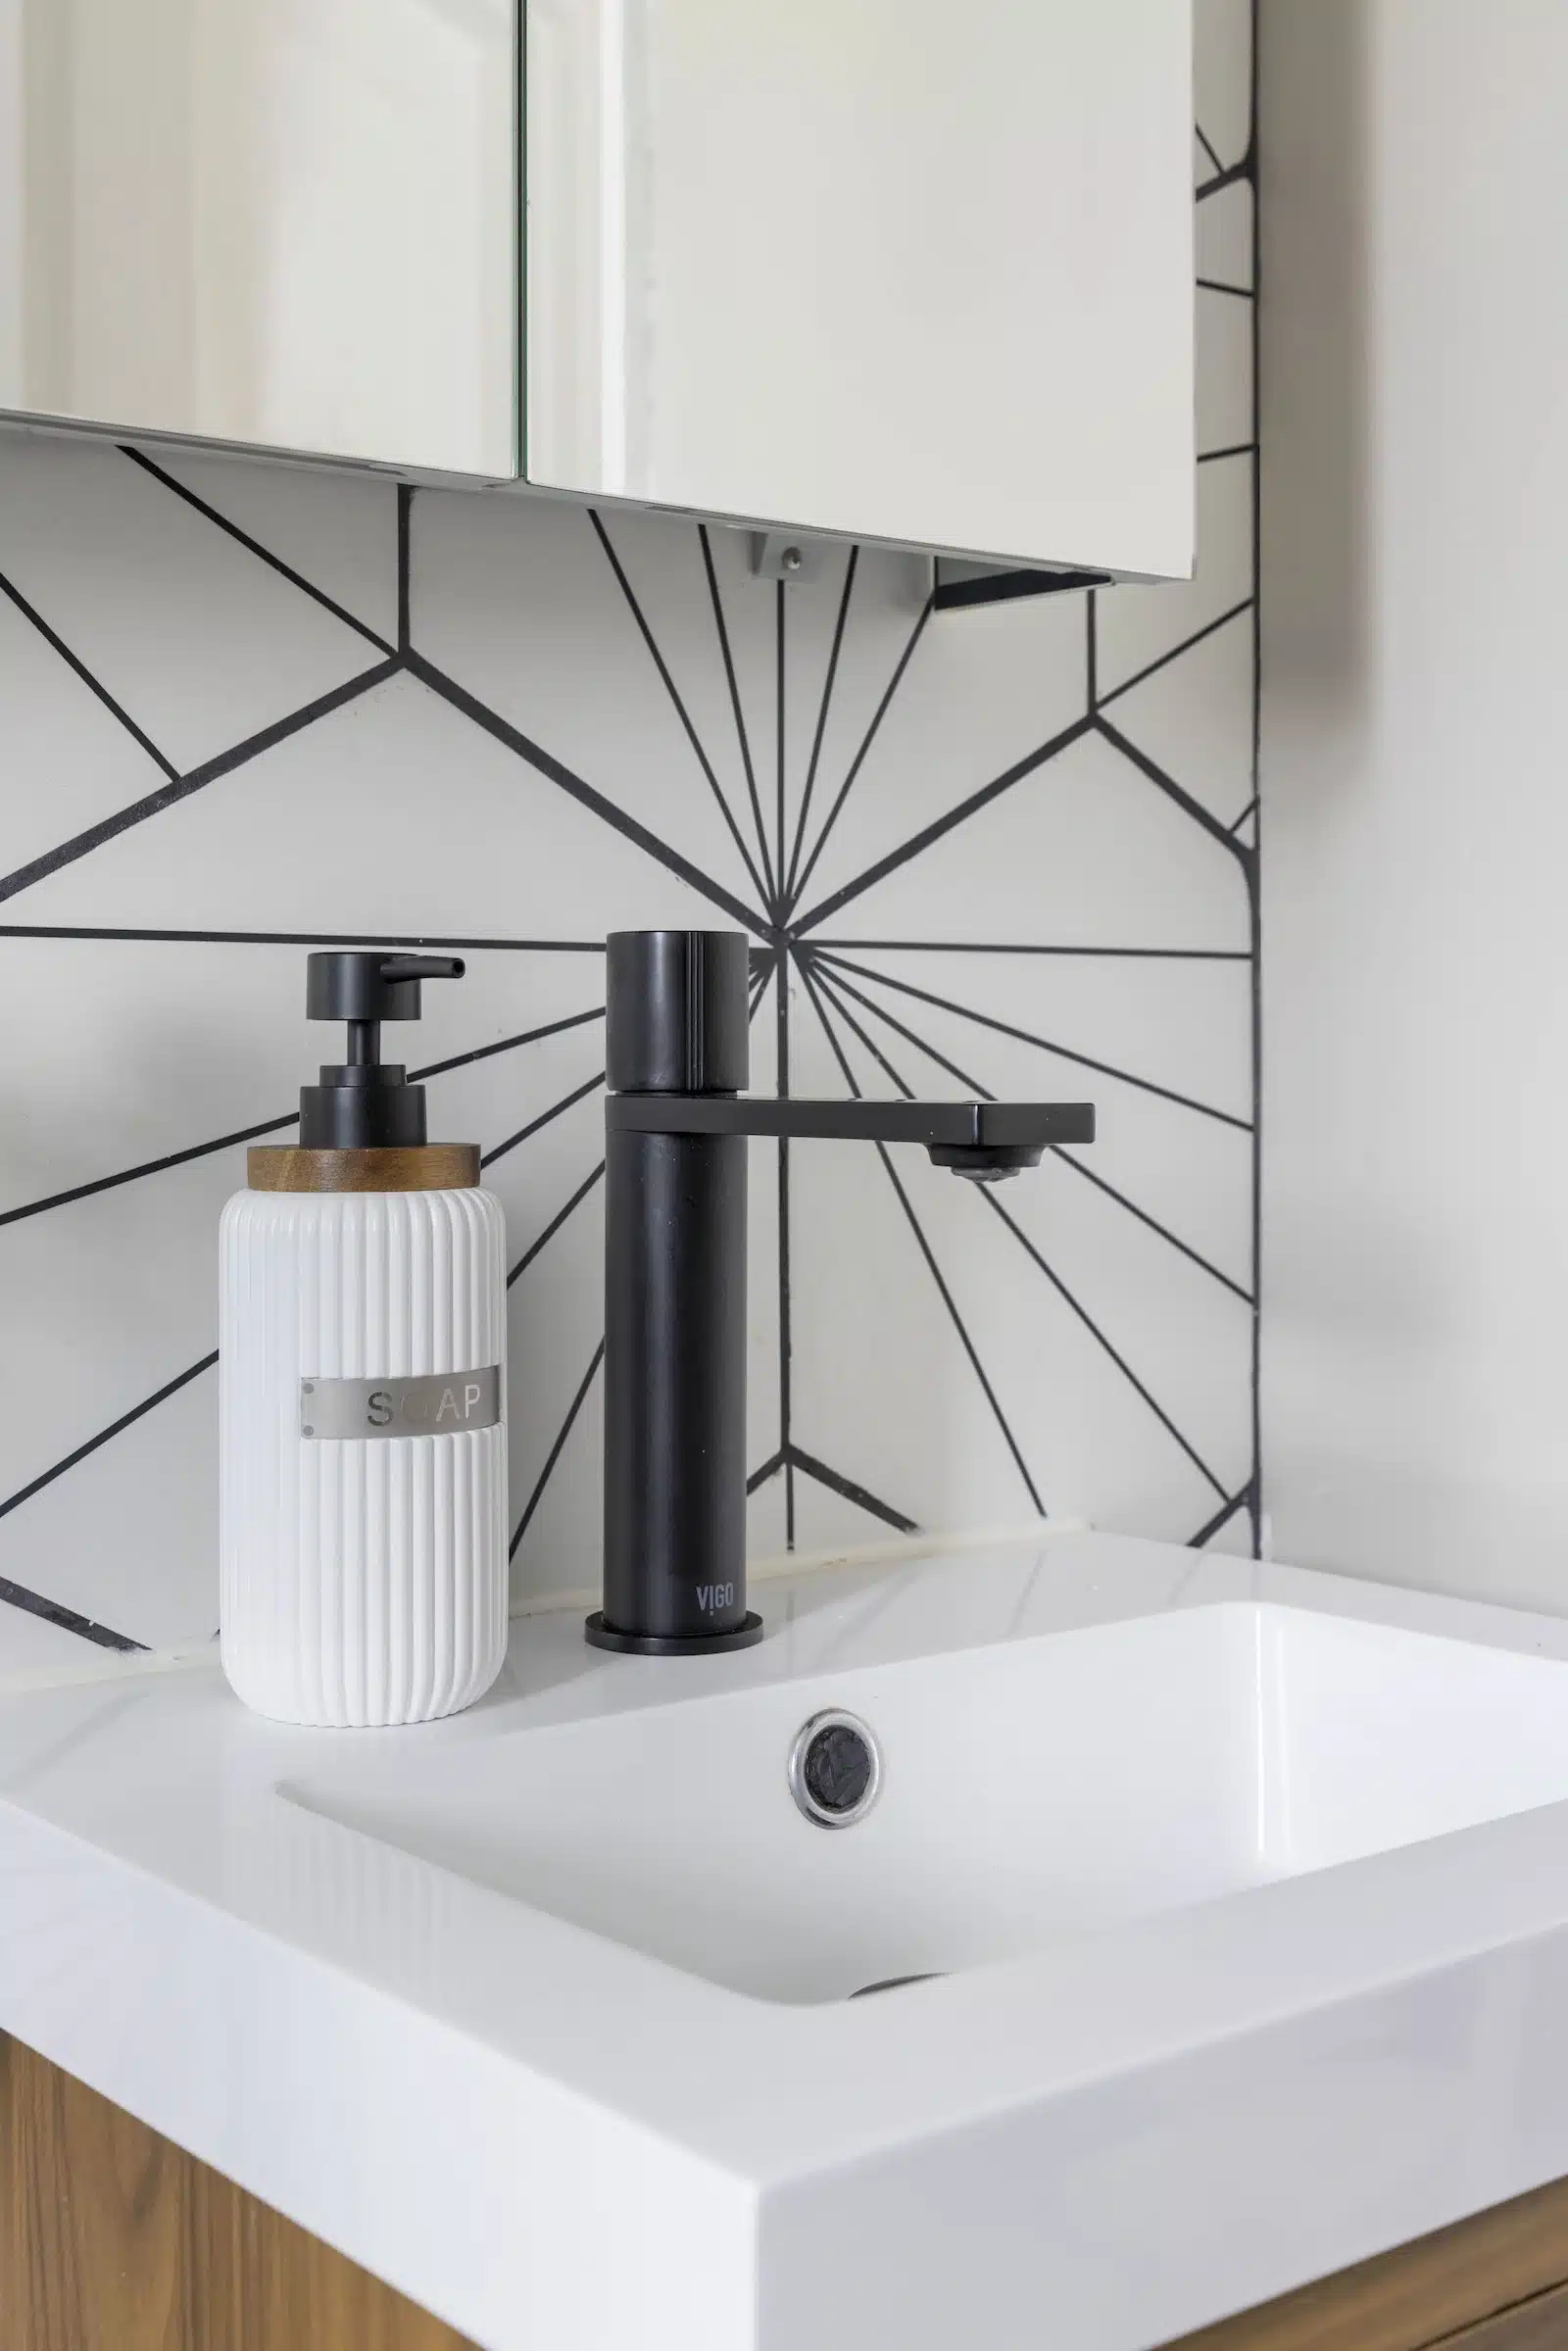 black and white hex patterned bathroom tile with black sink faucet